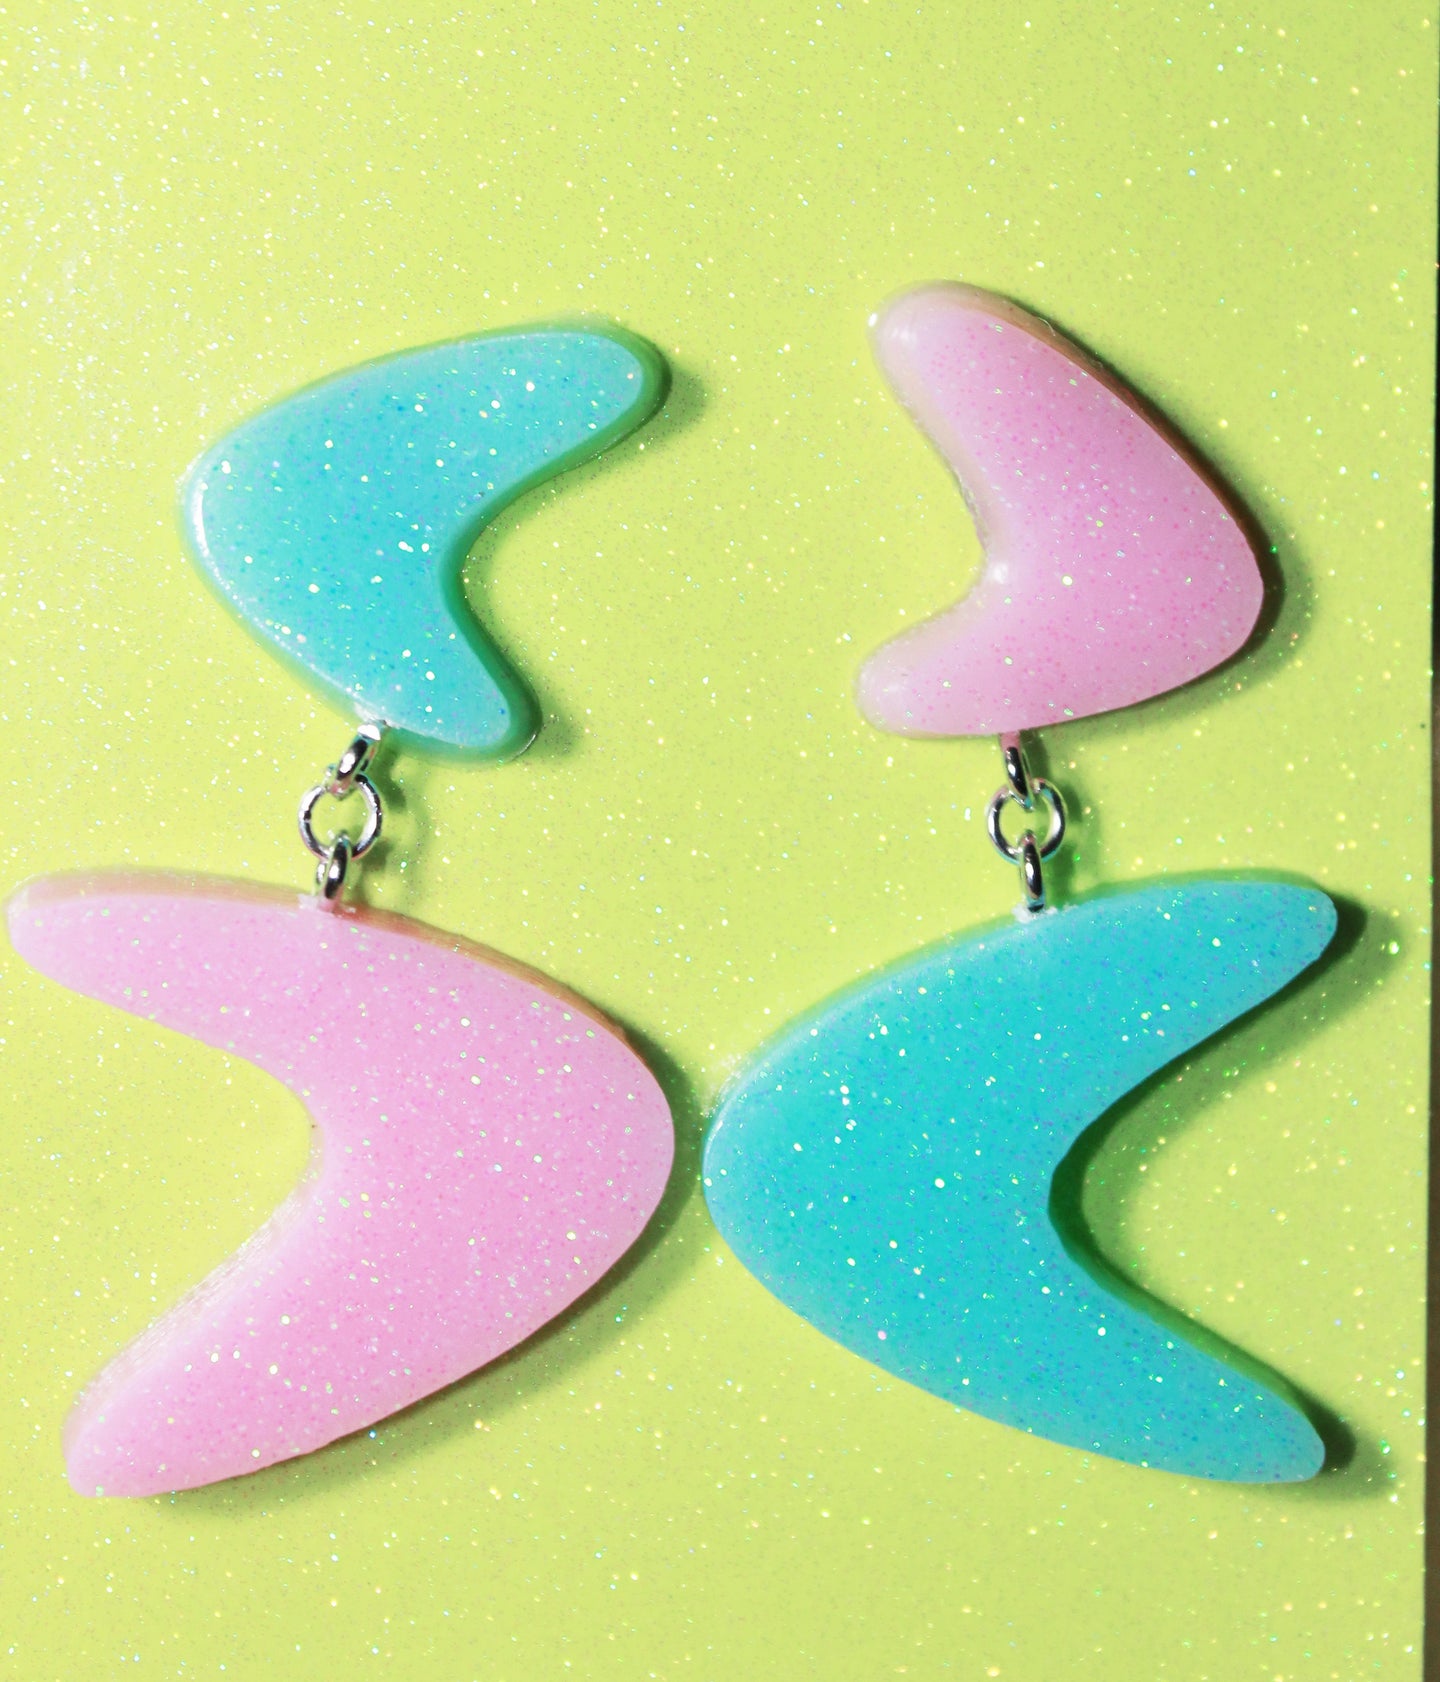 Boomerang Alley Retro Earrings in pink & turquoise